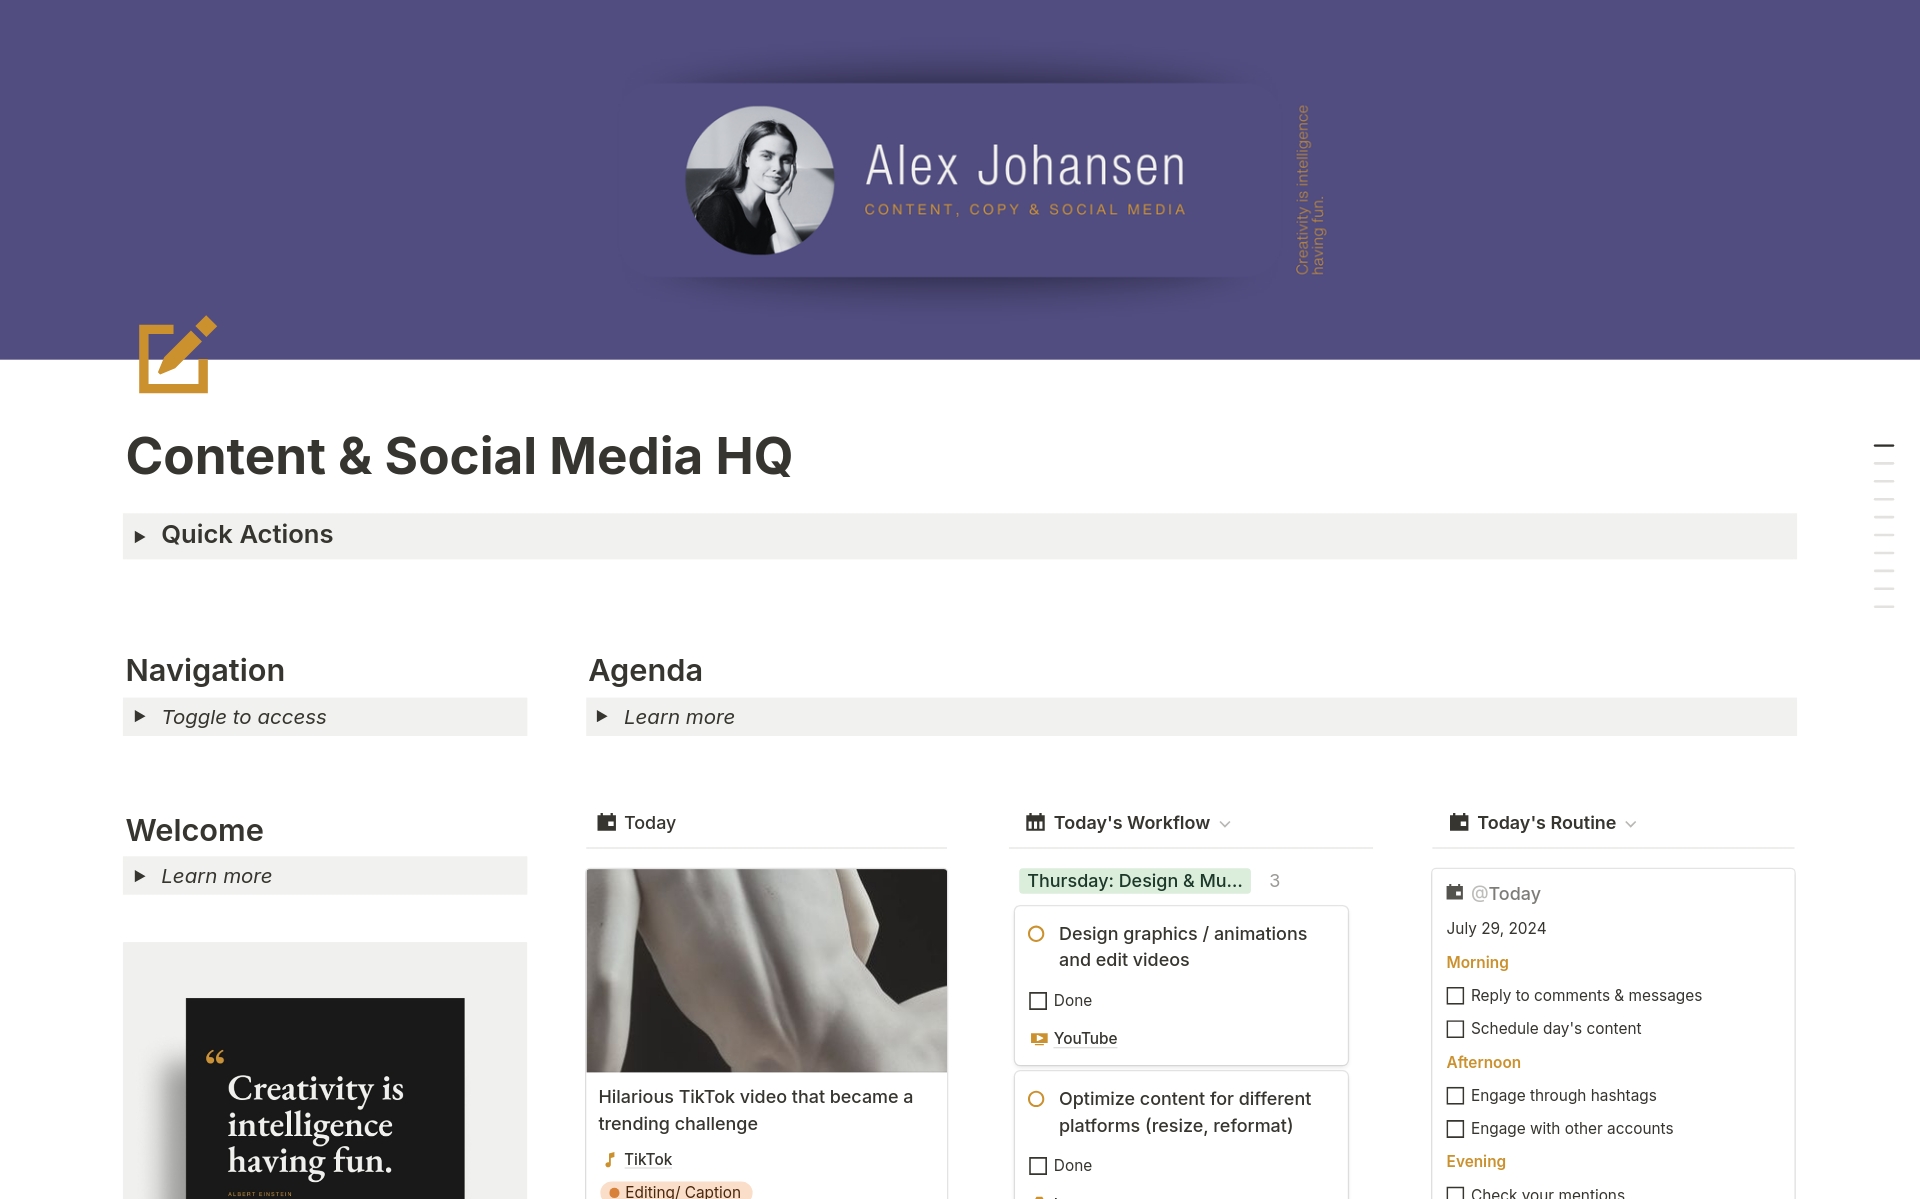 Create better content faster, boost your engagement, and grow your brand with Content HQ --- an all-in-one Notion social media and content planner that empowers you to plan, create, and manage great-performing content across all your channels.